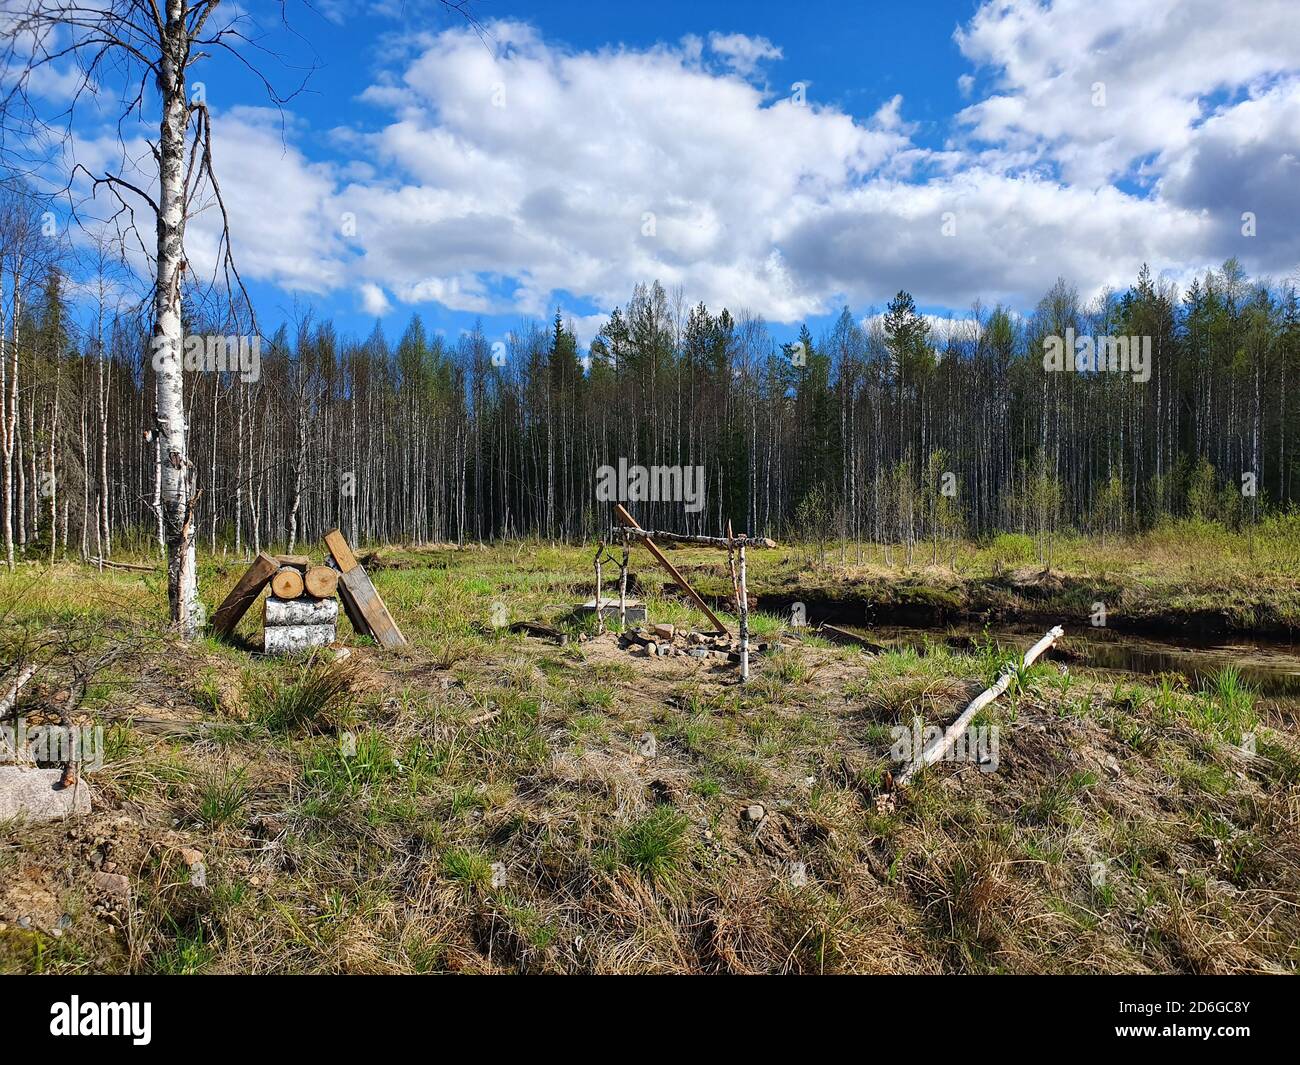 Abandoned campsite or campsite. On the edge of the forest near the shore, tourists set up a camp. Stock Photo